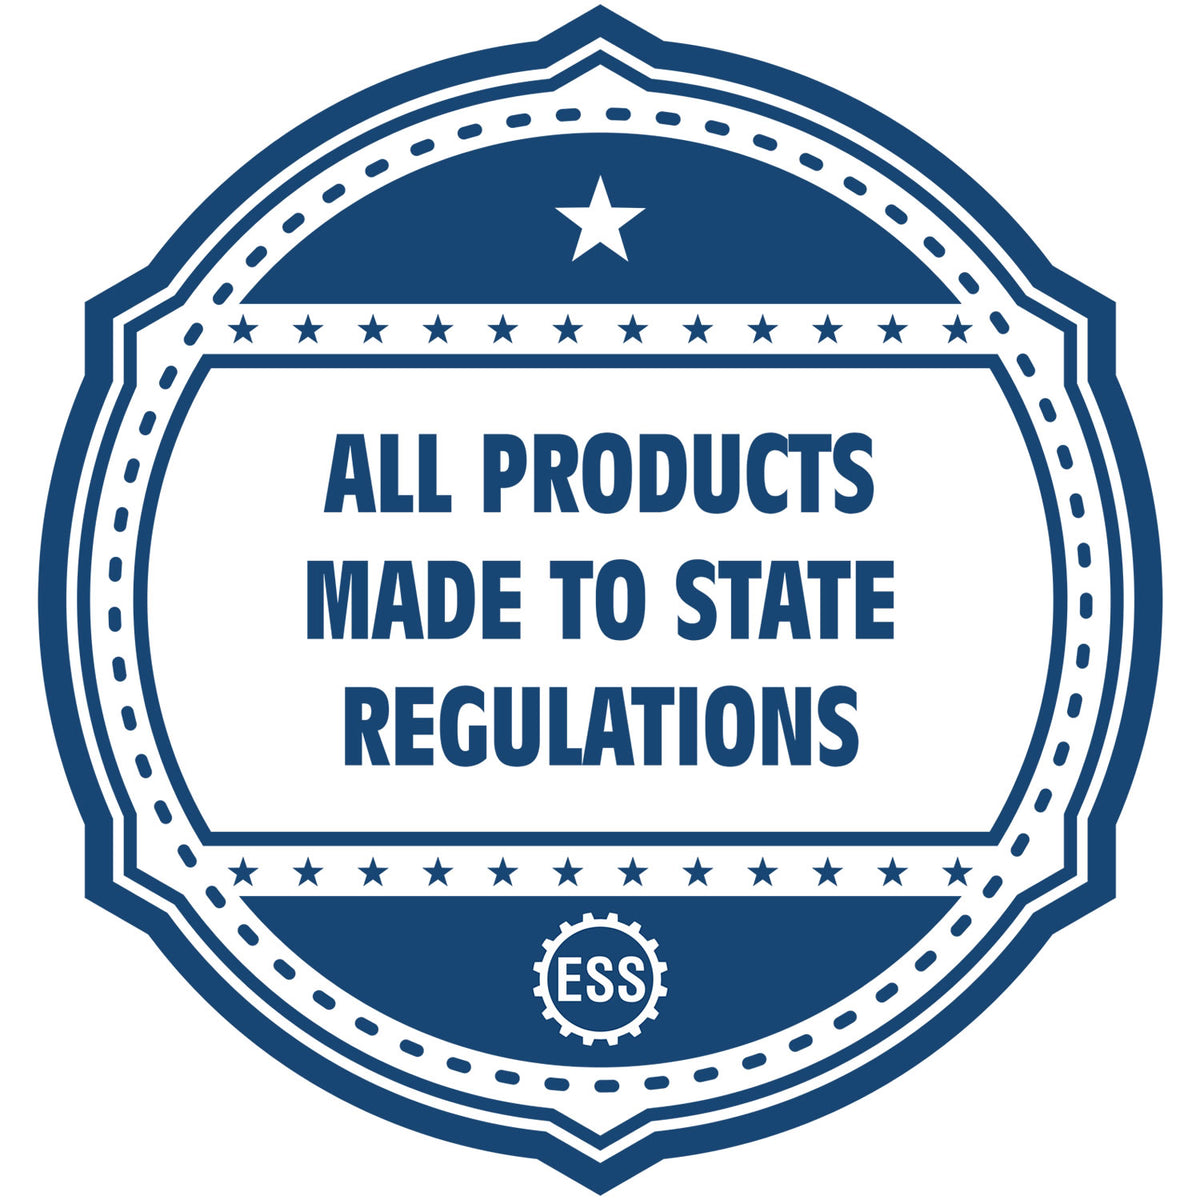 An icon or badge element for the Self-Inking North Dakota PE Stamp showing that this product is made in compliance with state regulations.